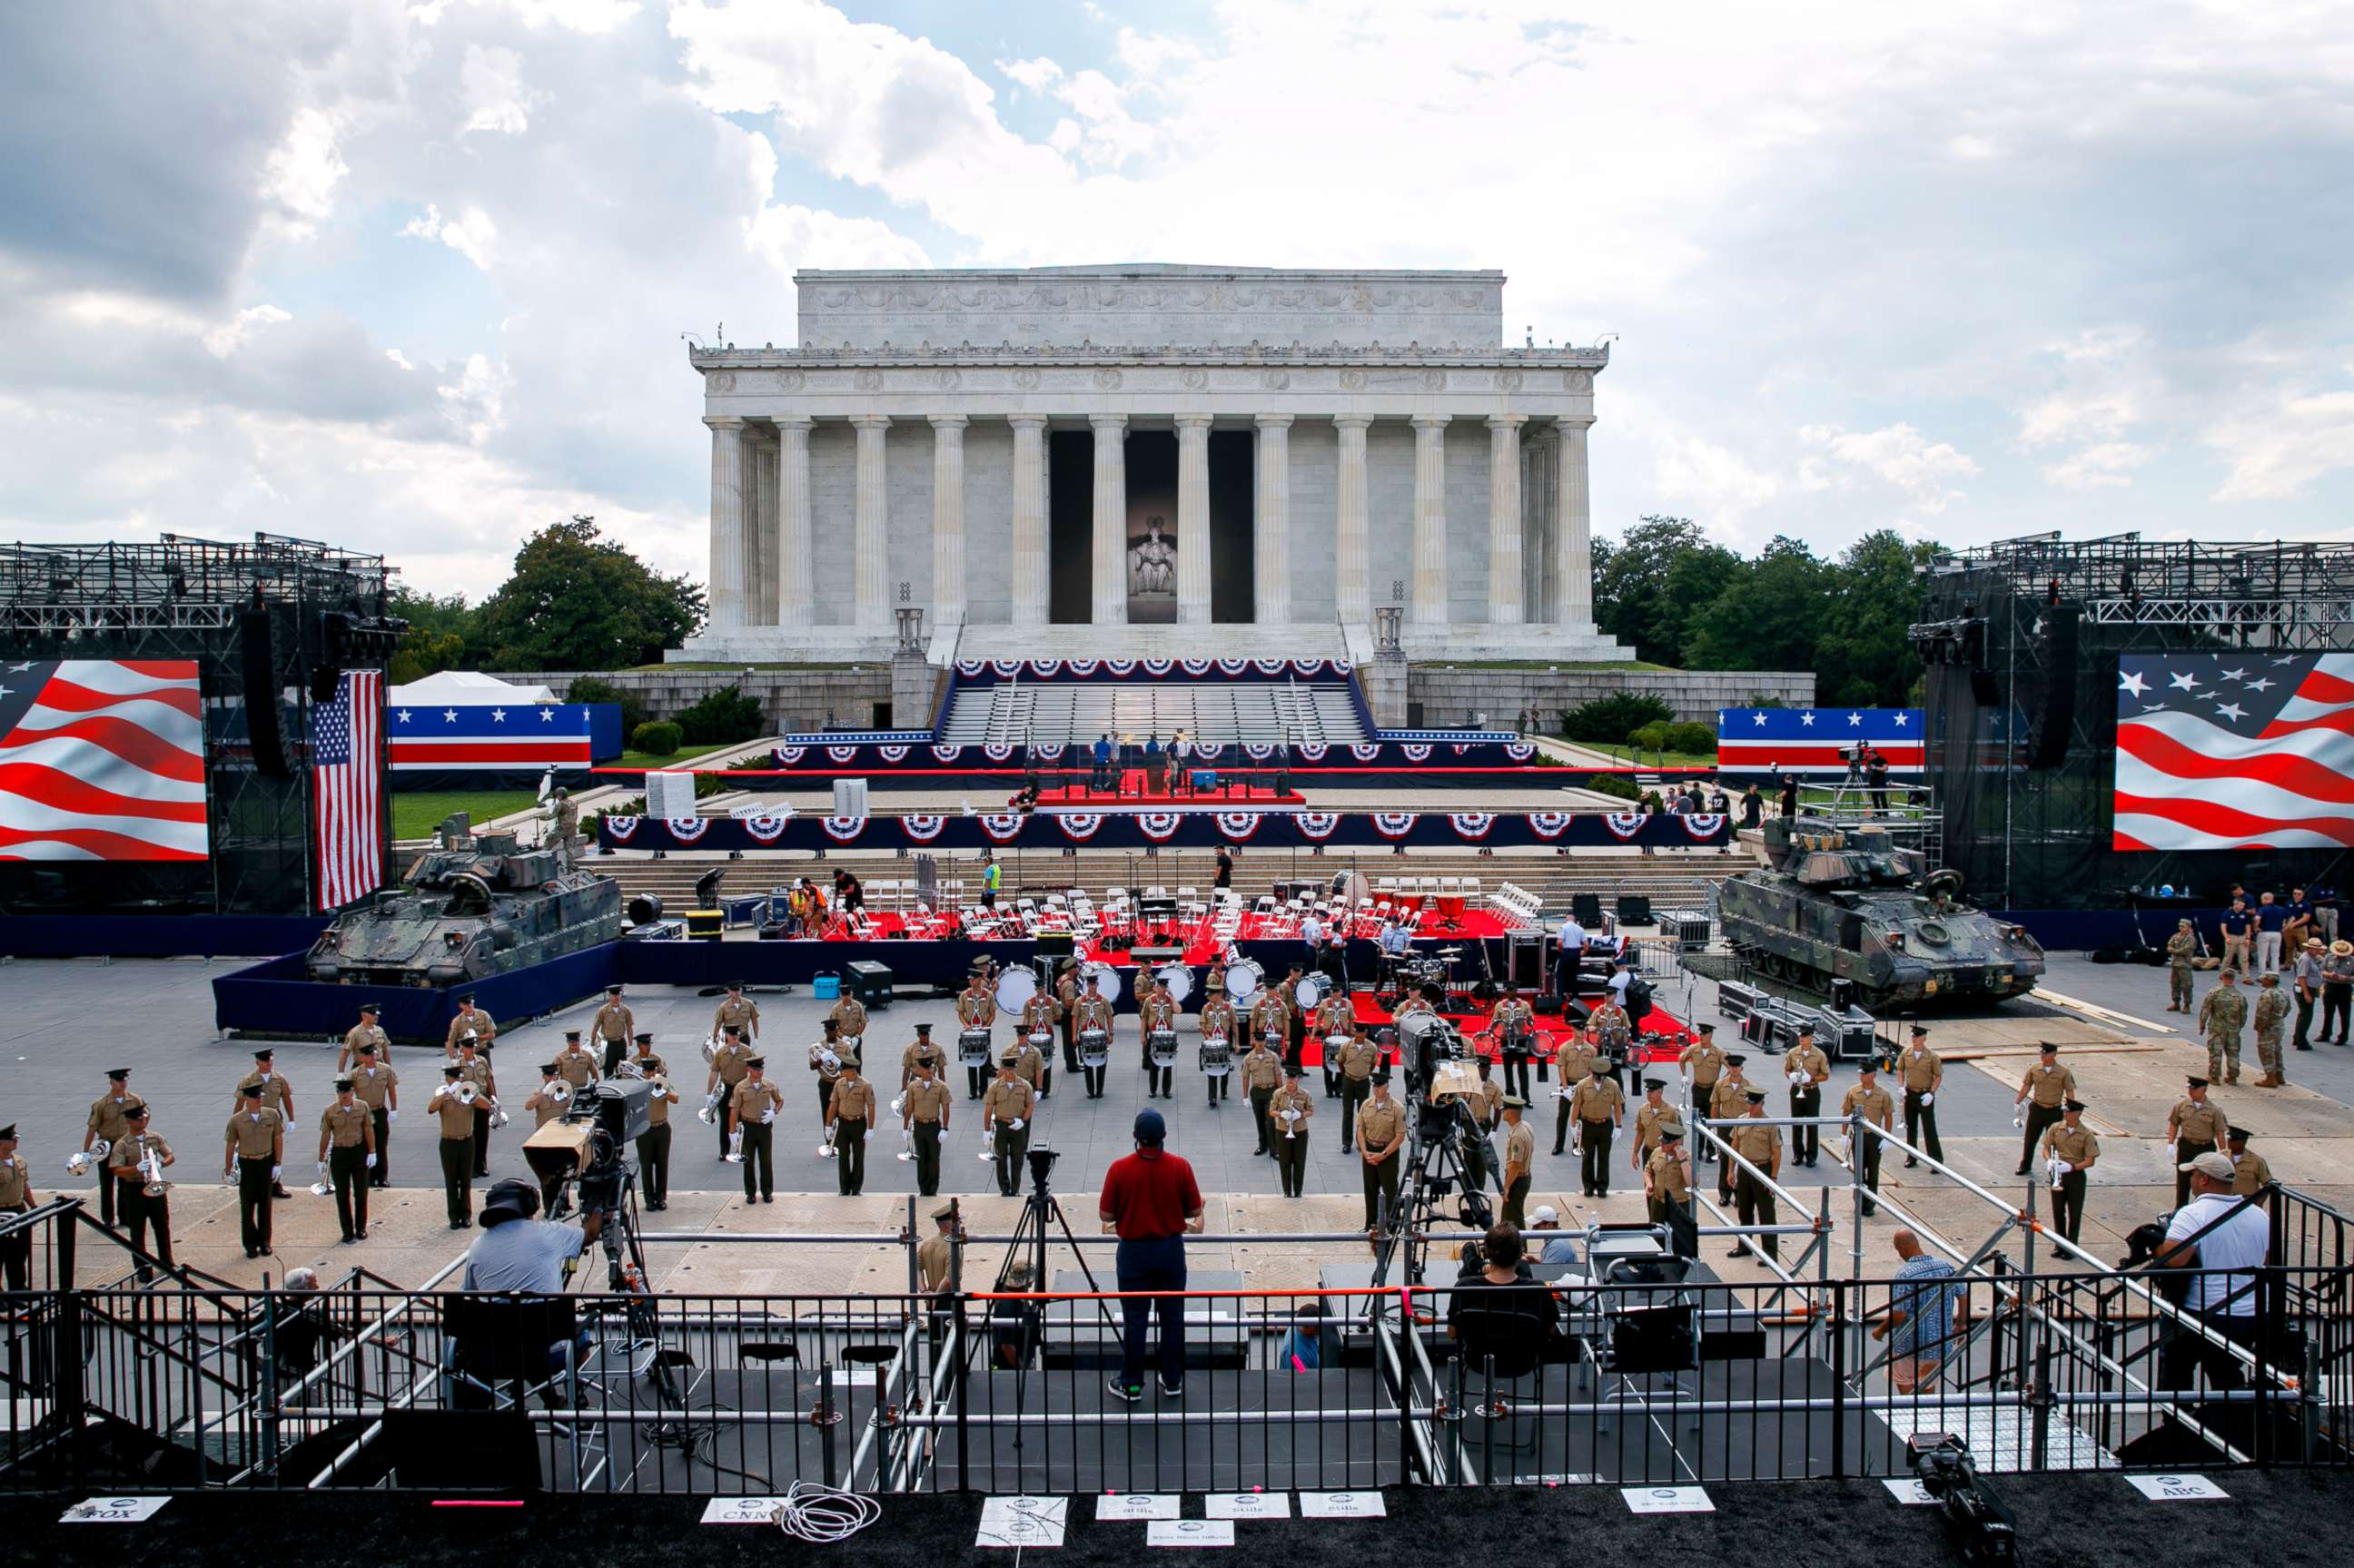 PHOTO: Two Bradley Fighting Vehicles flank the stage being prepared in front of the Lincoln Memorial, July 3, 2019, in Washington D.C., ahead of planned Fourth of July festivities with President Donald Trump. 